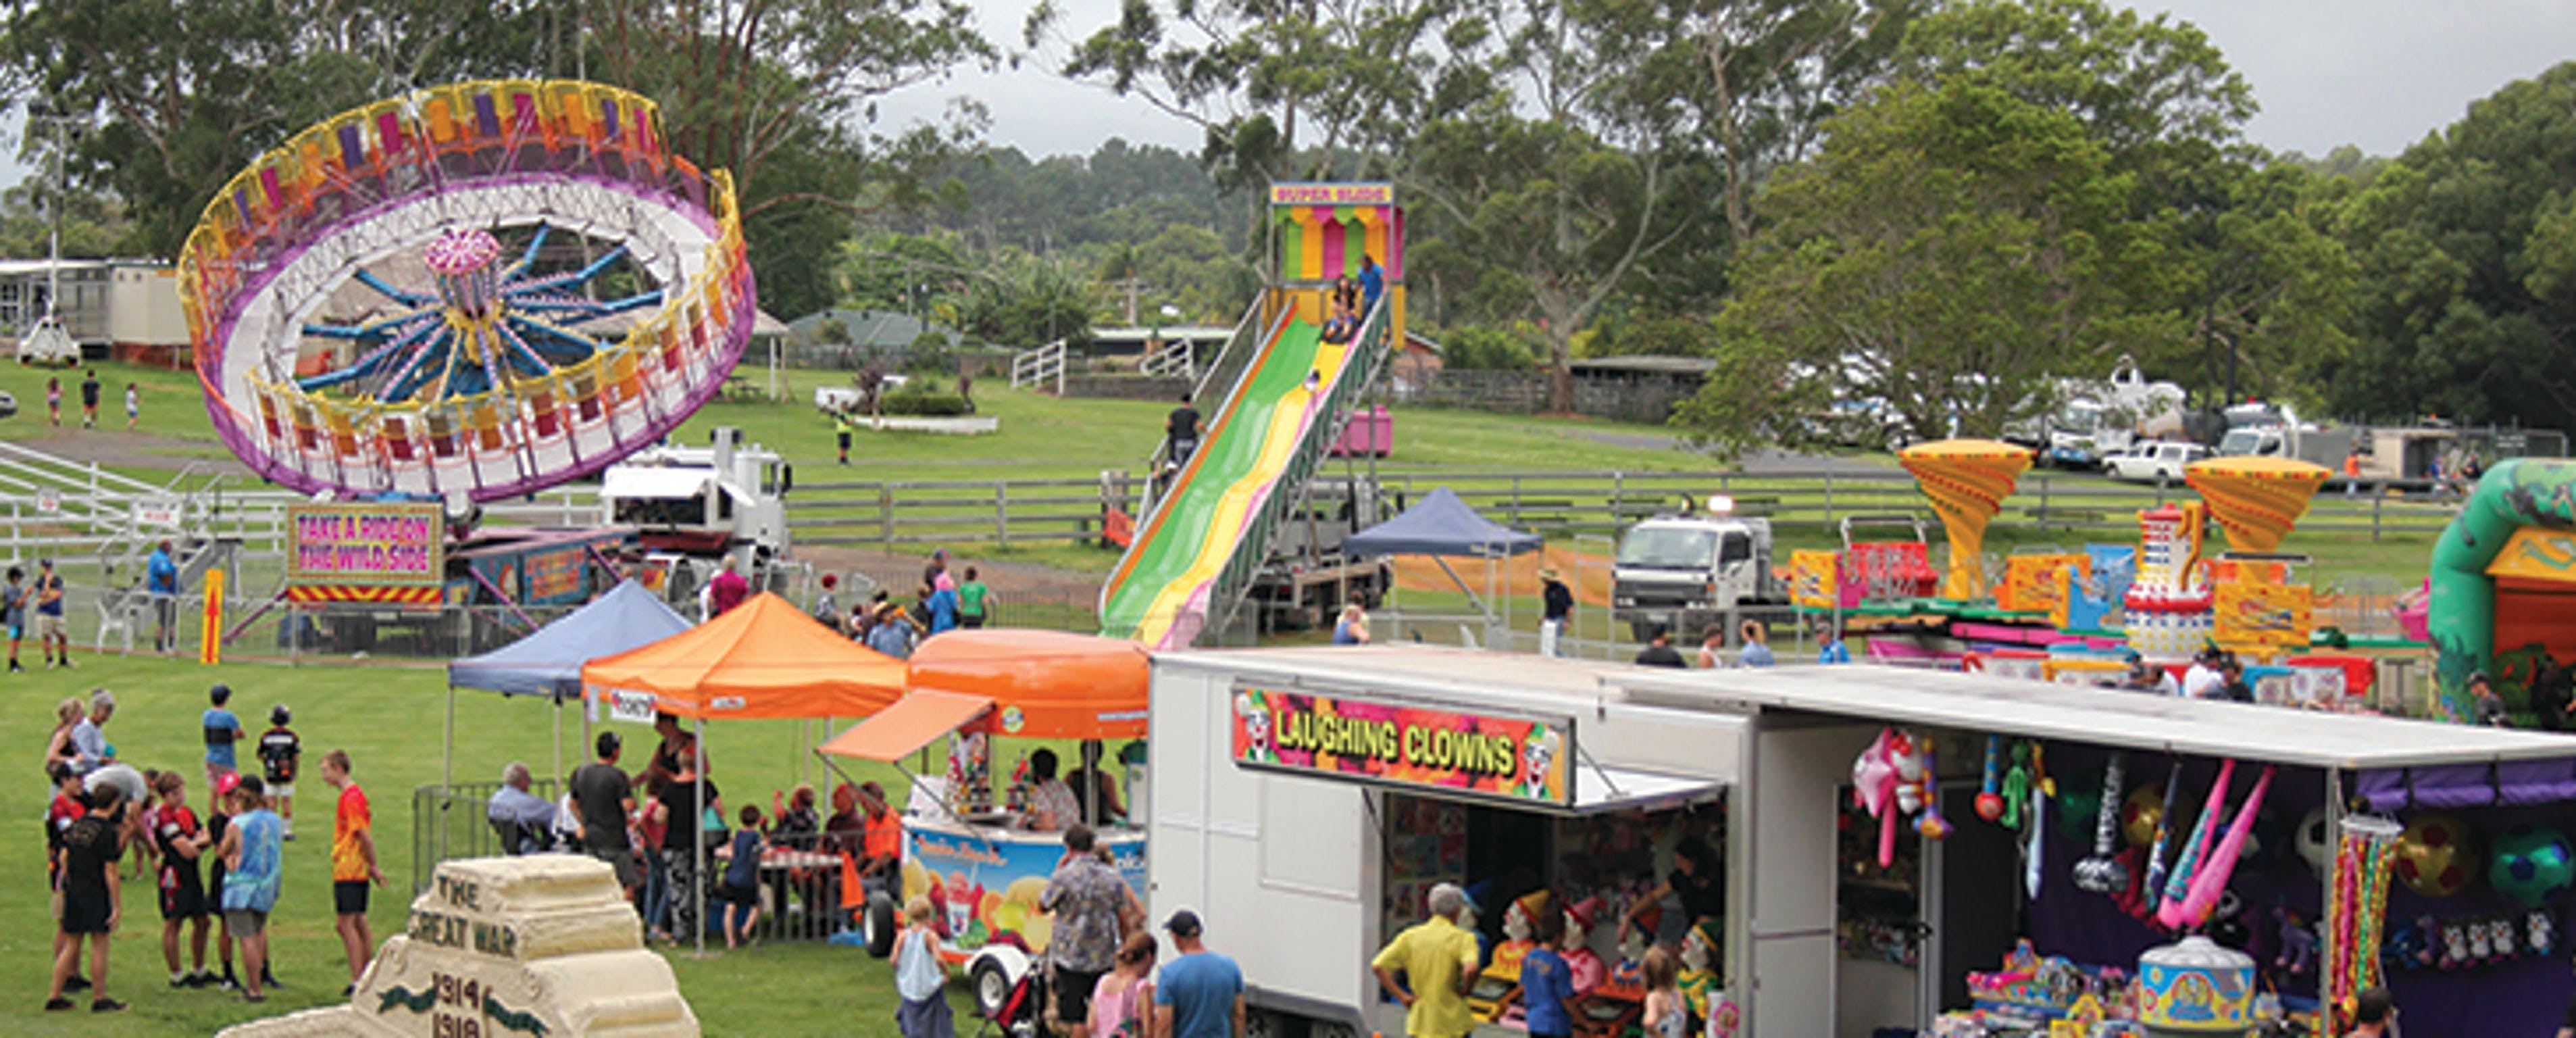 Alstonville Agricultural Society Show - Nambucca Heads Accommodation